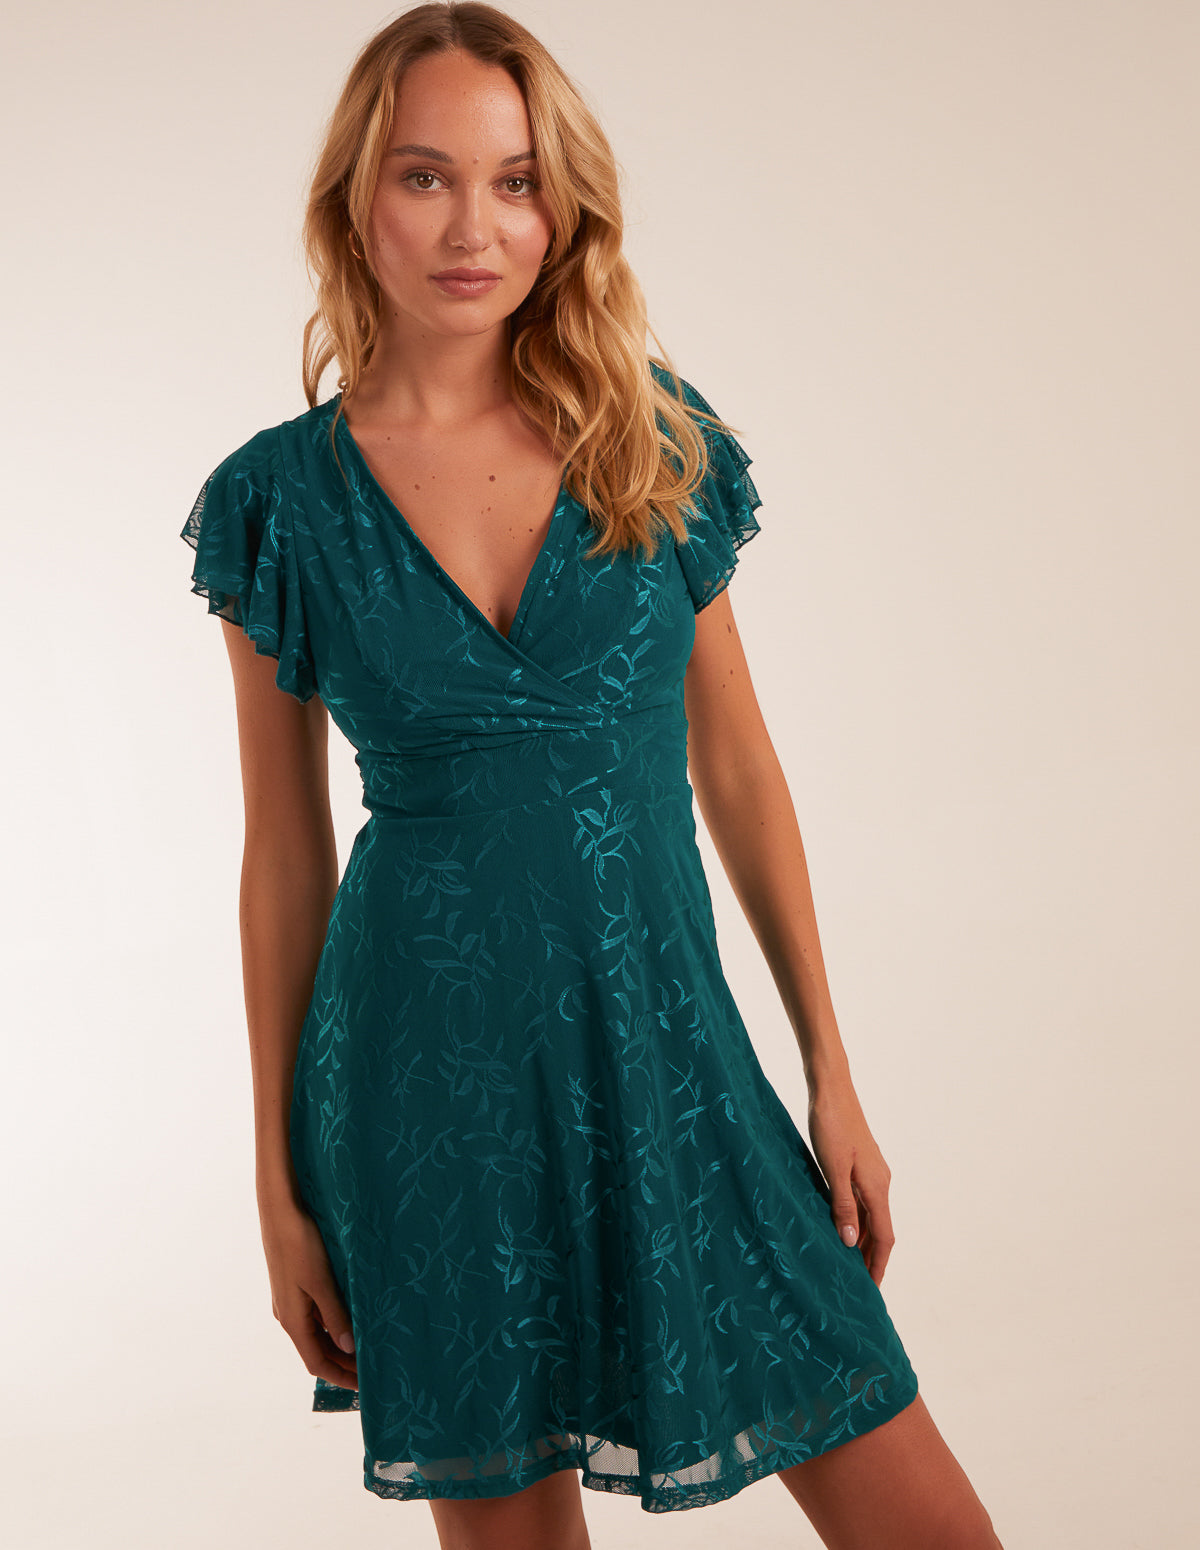 Double Frill Wrap Dress - 14 / Teal